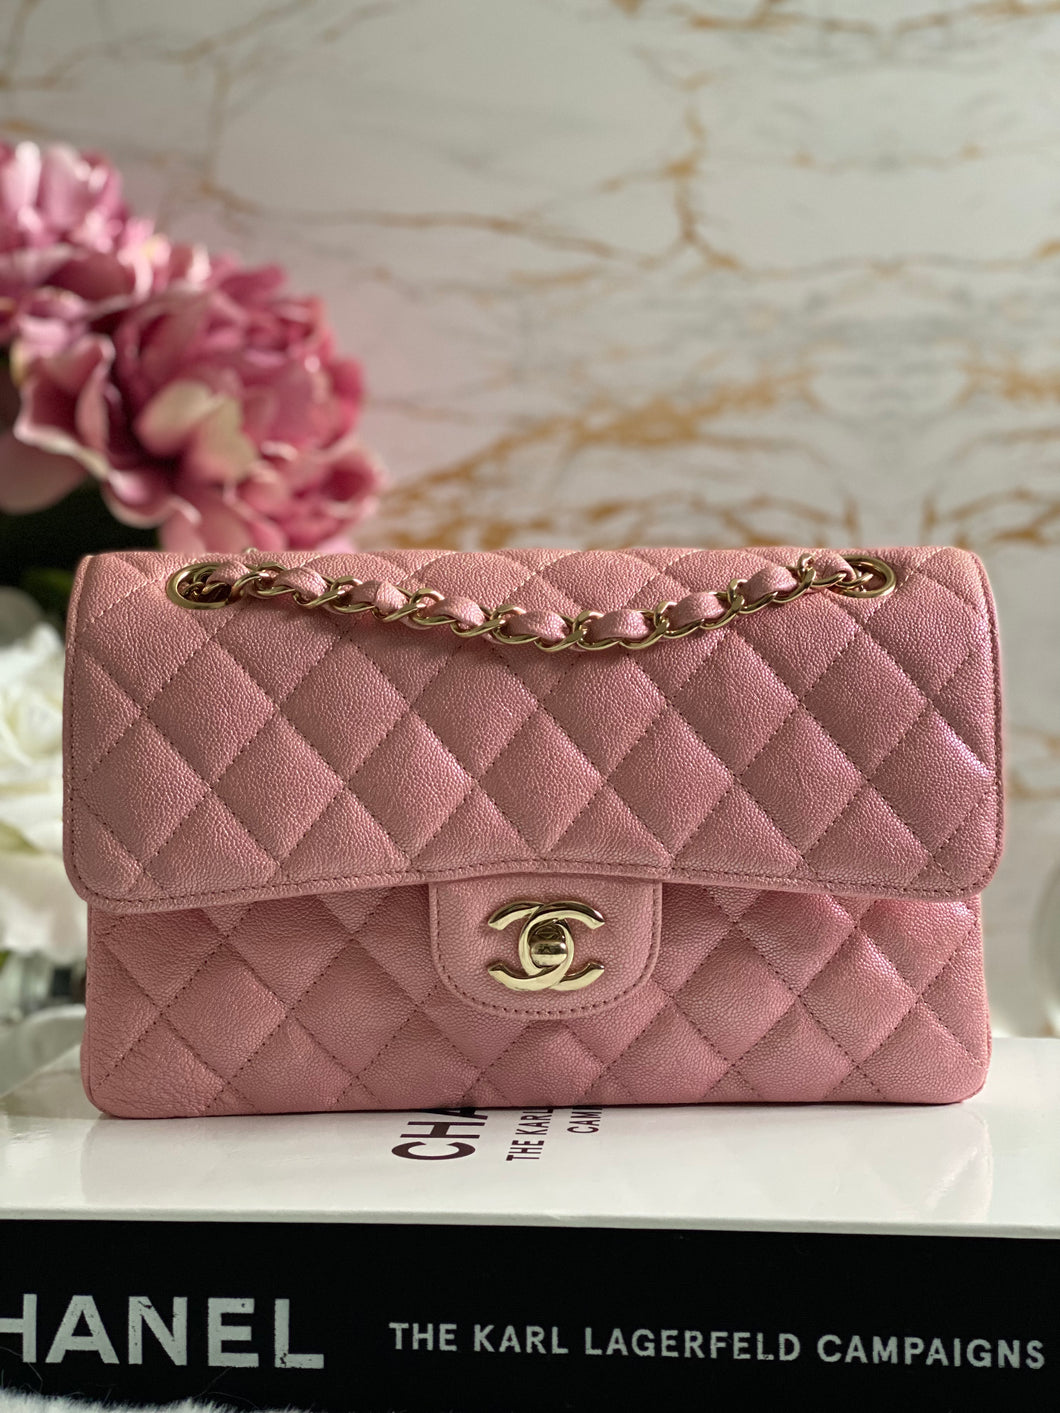 CHANEL, Bags, Chanel 9 Pouch O Case In Iridescent Pink Nwt